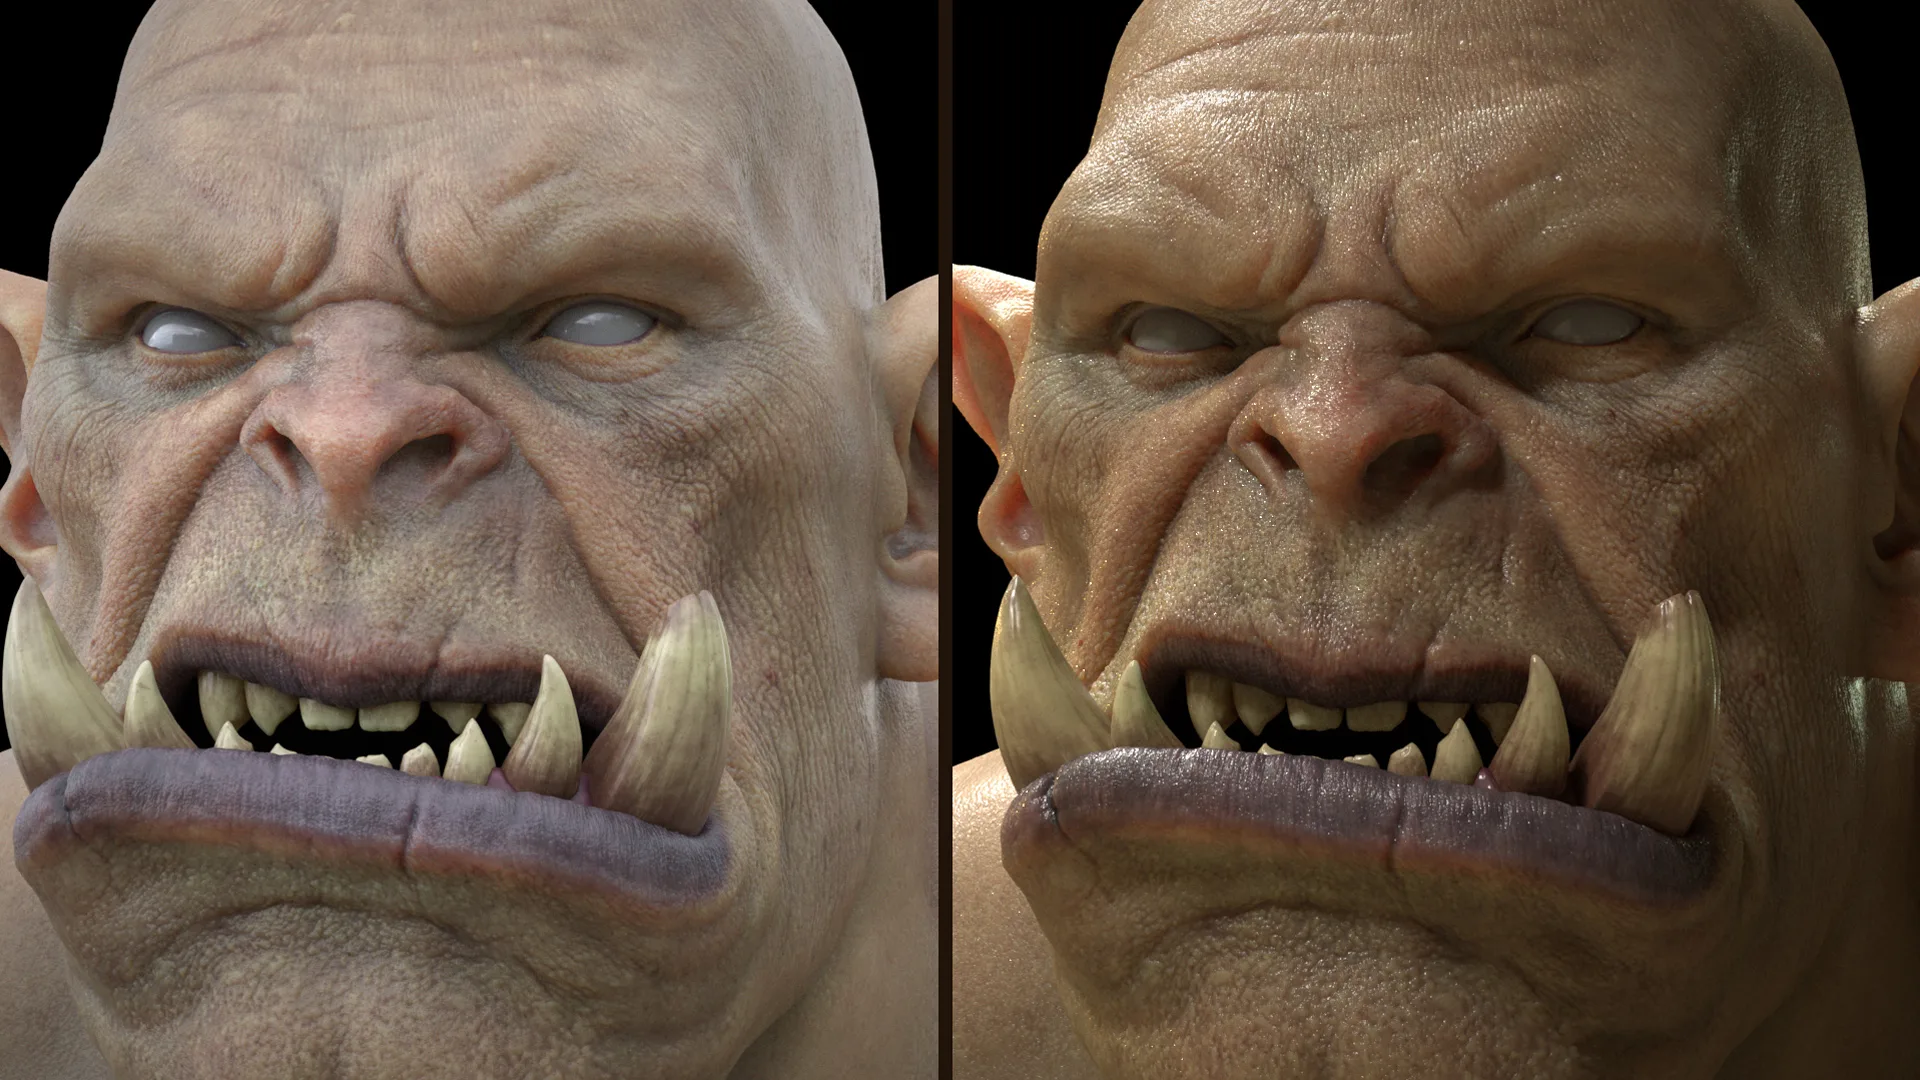 Skin Texturing And Shading In Mari And Arnold For Production